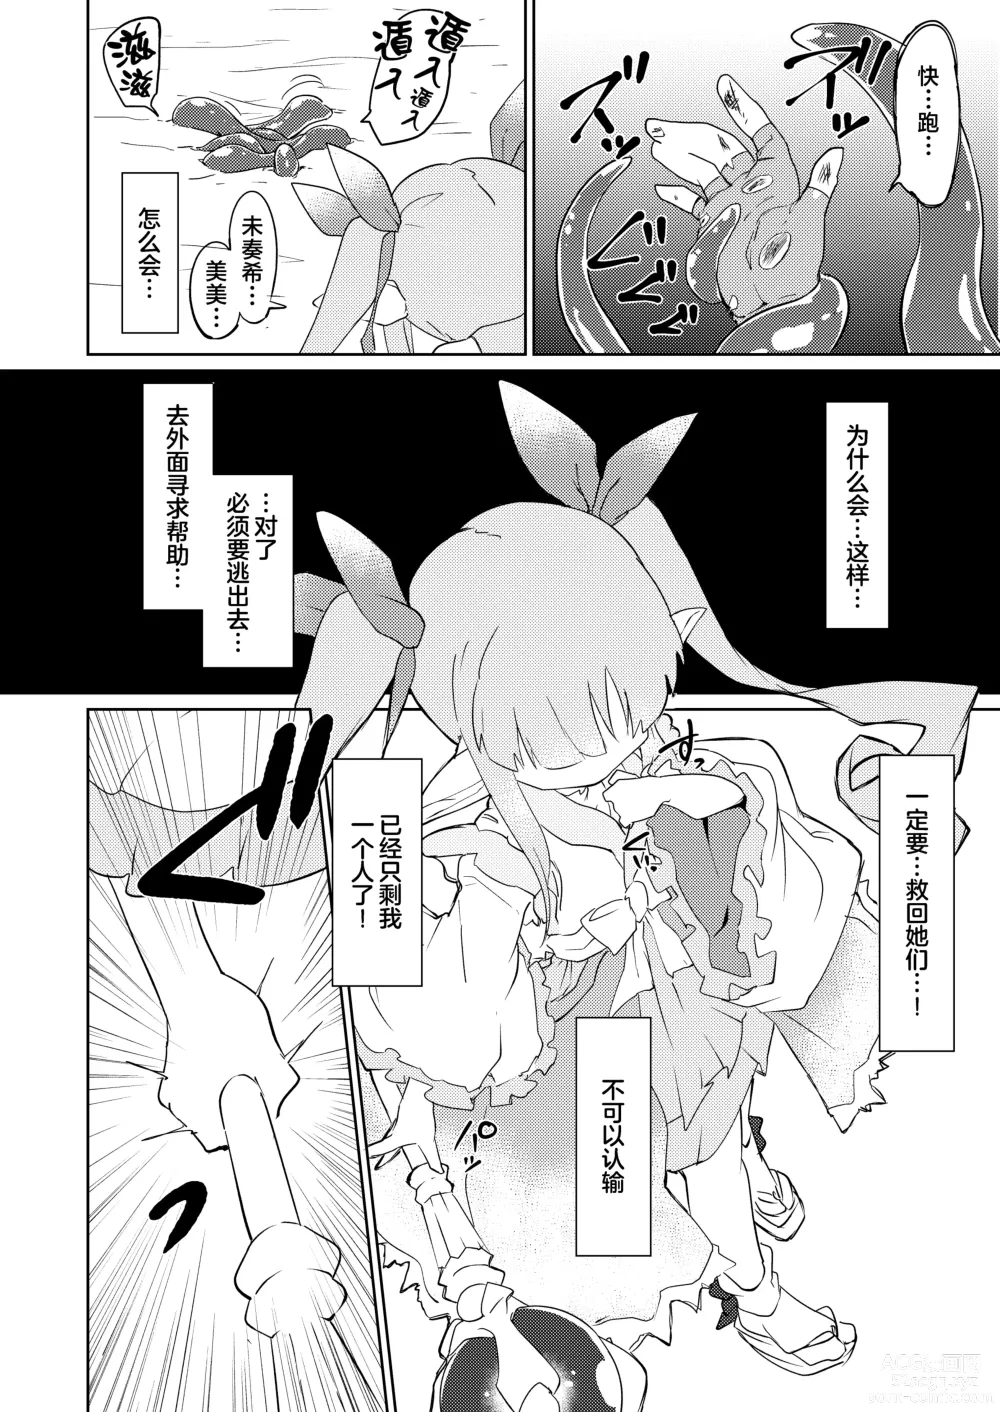 Page 9 of doujinshi Tentacle Defeat Little Lyrical Edition Prototype